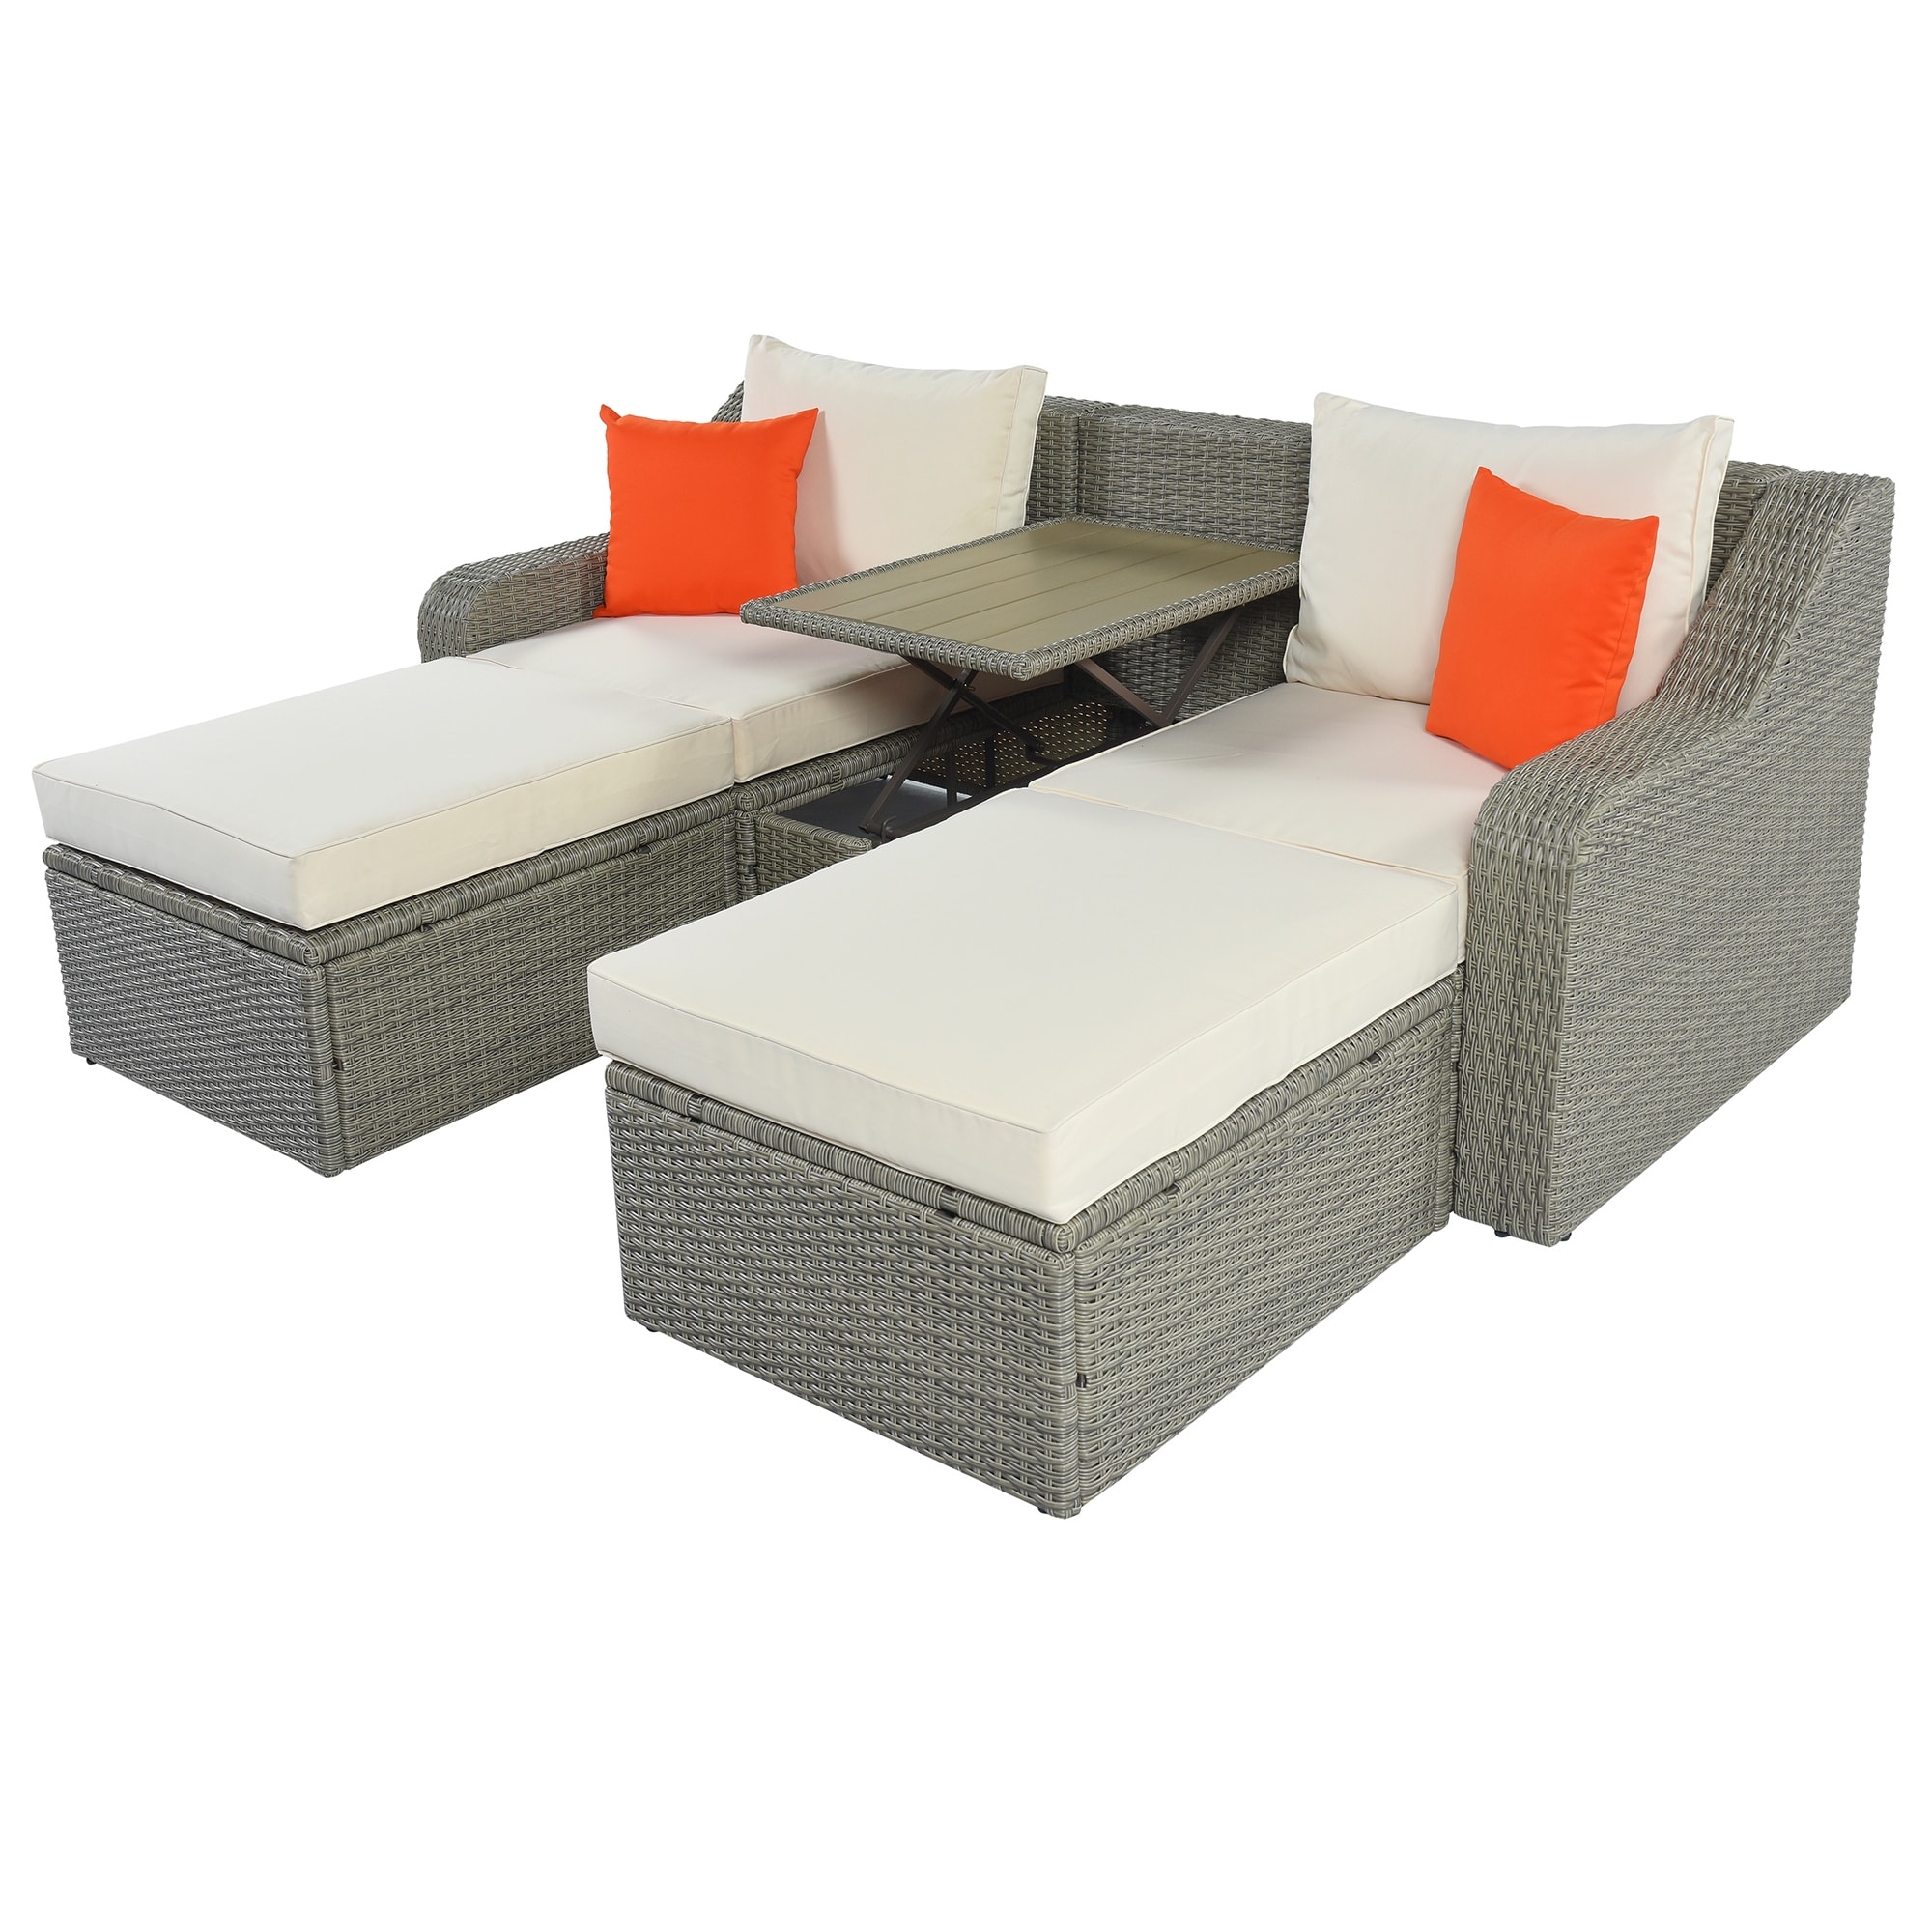 Patio Furniture Sets  3-piece Patio Wicker Sofa With Cushions  Ottomans And Lift Top Coffee Table